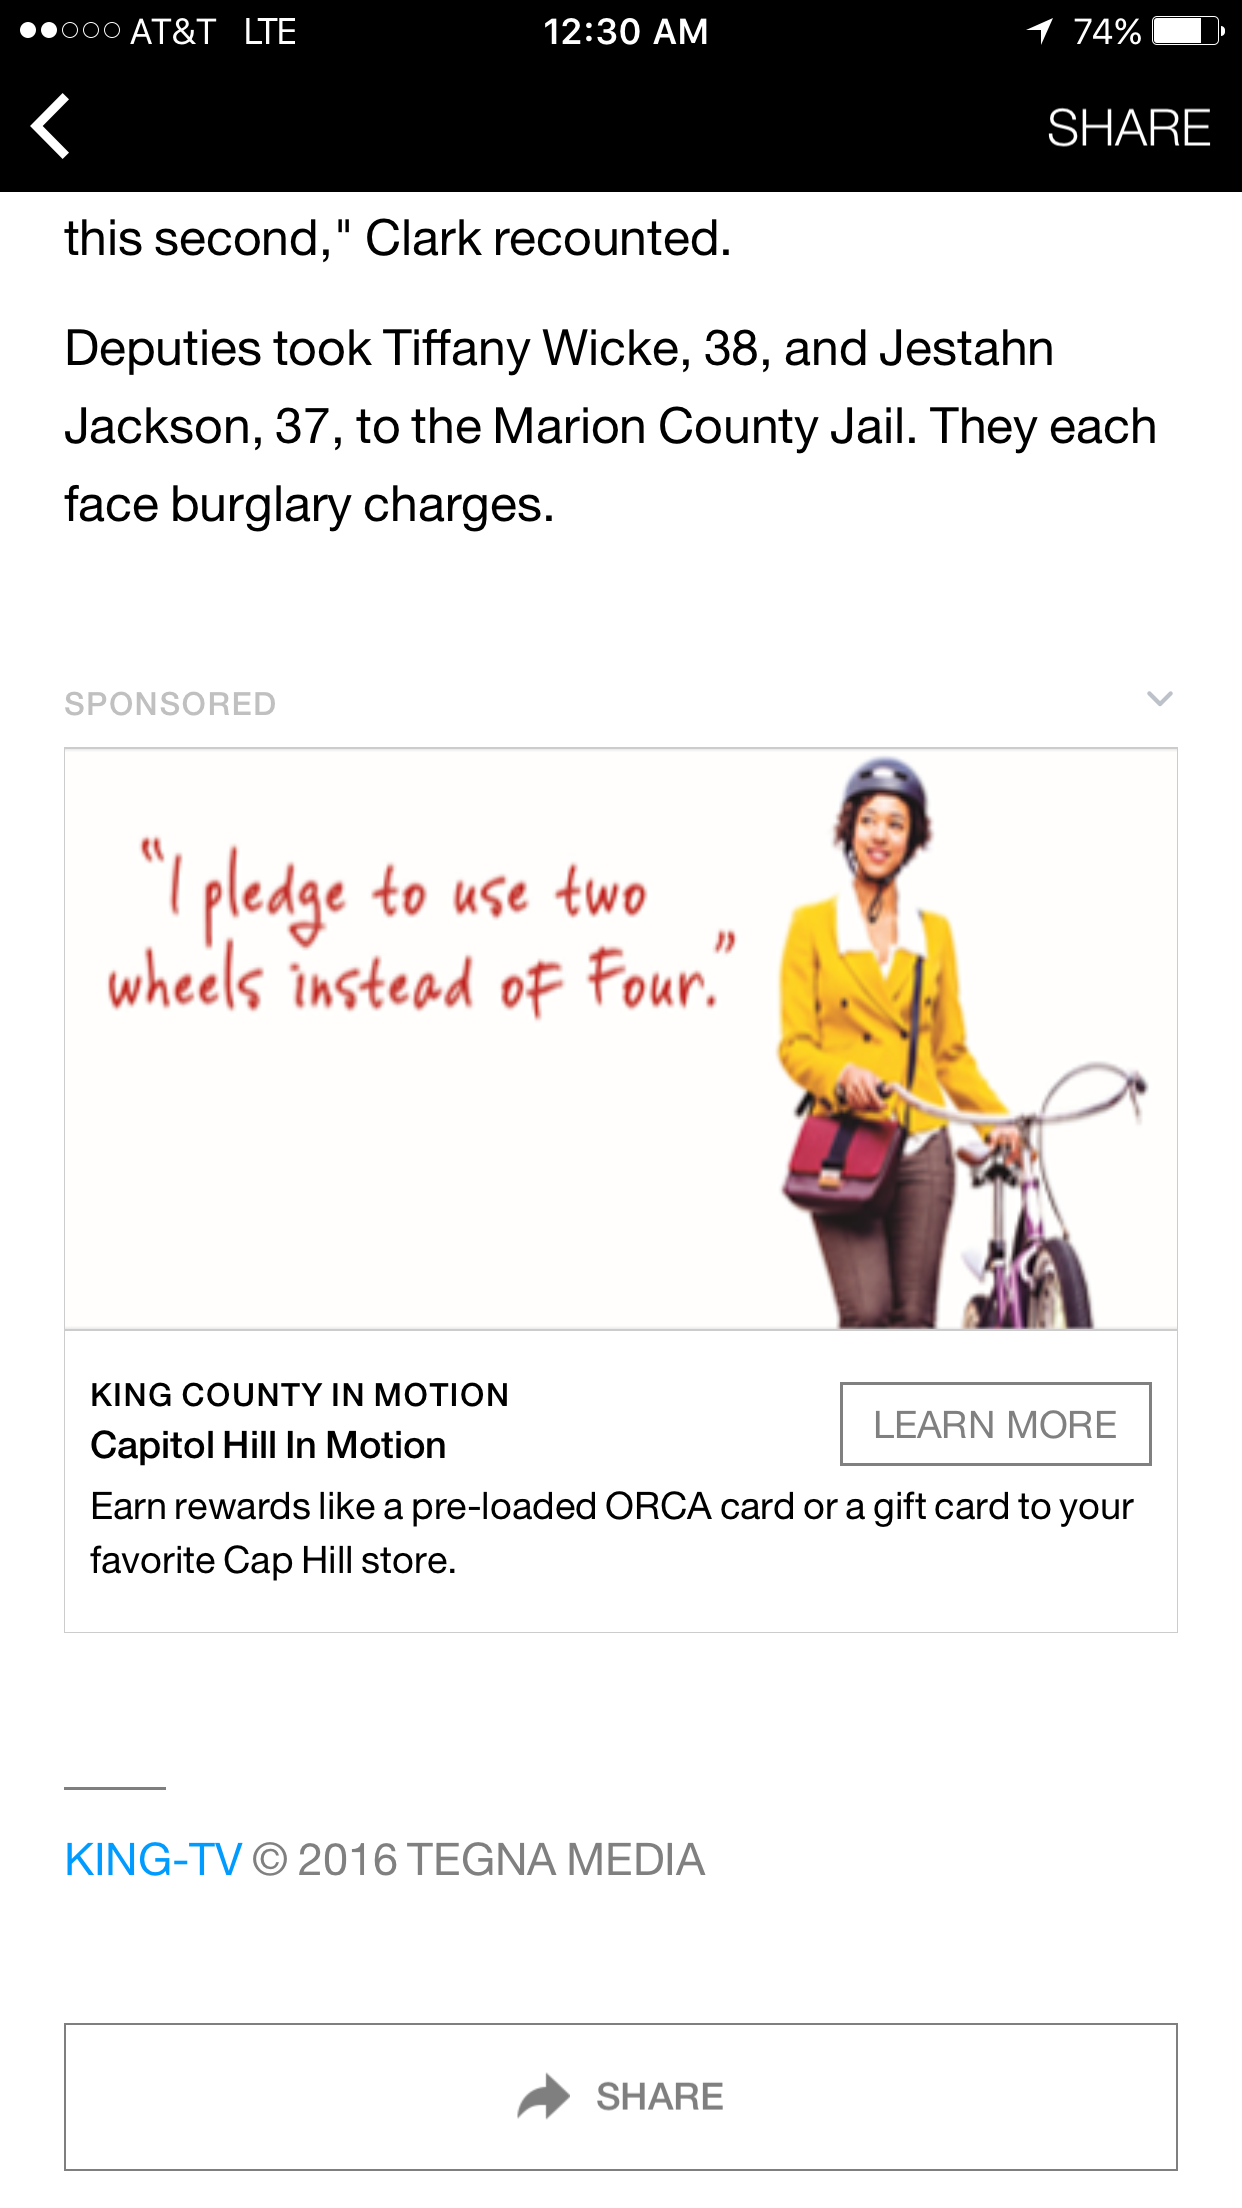 Three rounds of geo-targeted Facebook ads kept the campaign fresh